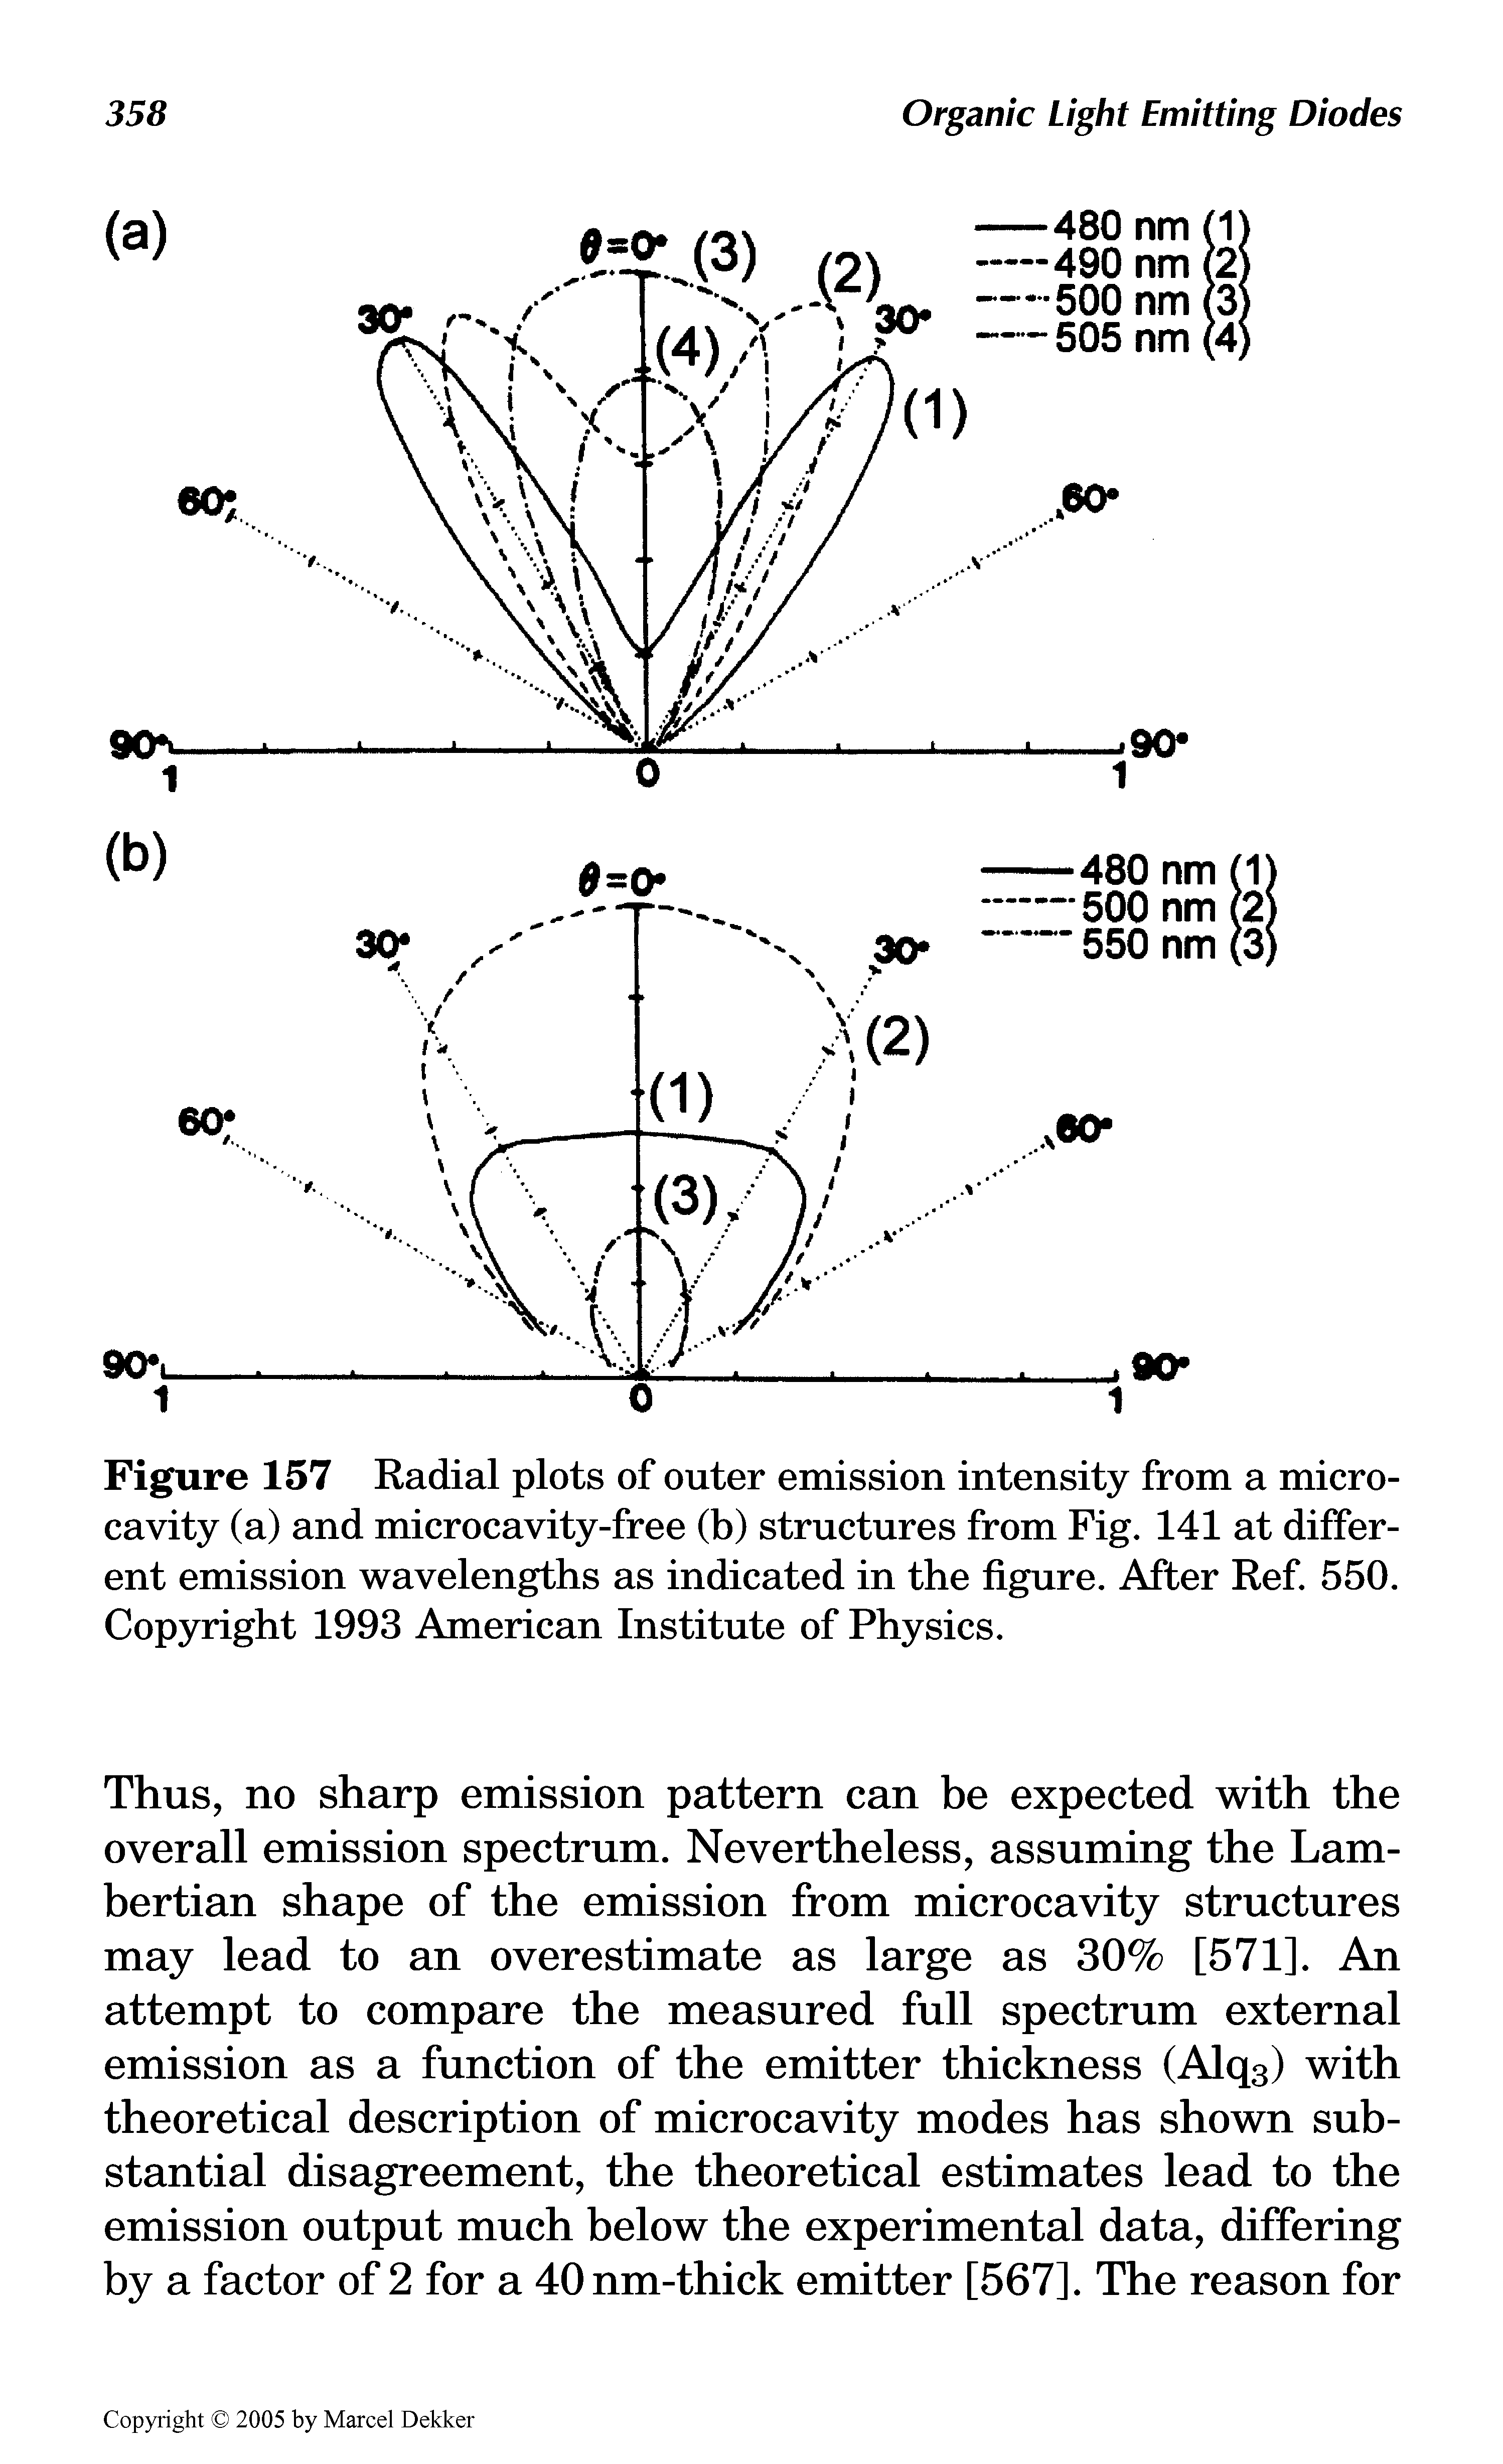 Figure 157 Radial plots of outer emission intensity from a microcavity (a) and microcavity-free (b) structures from Fig. 141 at different emission wavelengths as indicated in the figure. After Ref. 550. Copyright 1993 American Institute of Physics.